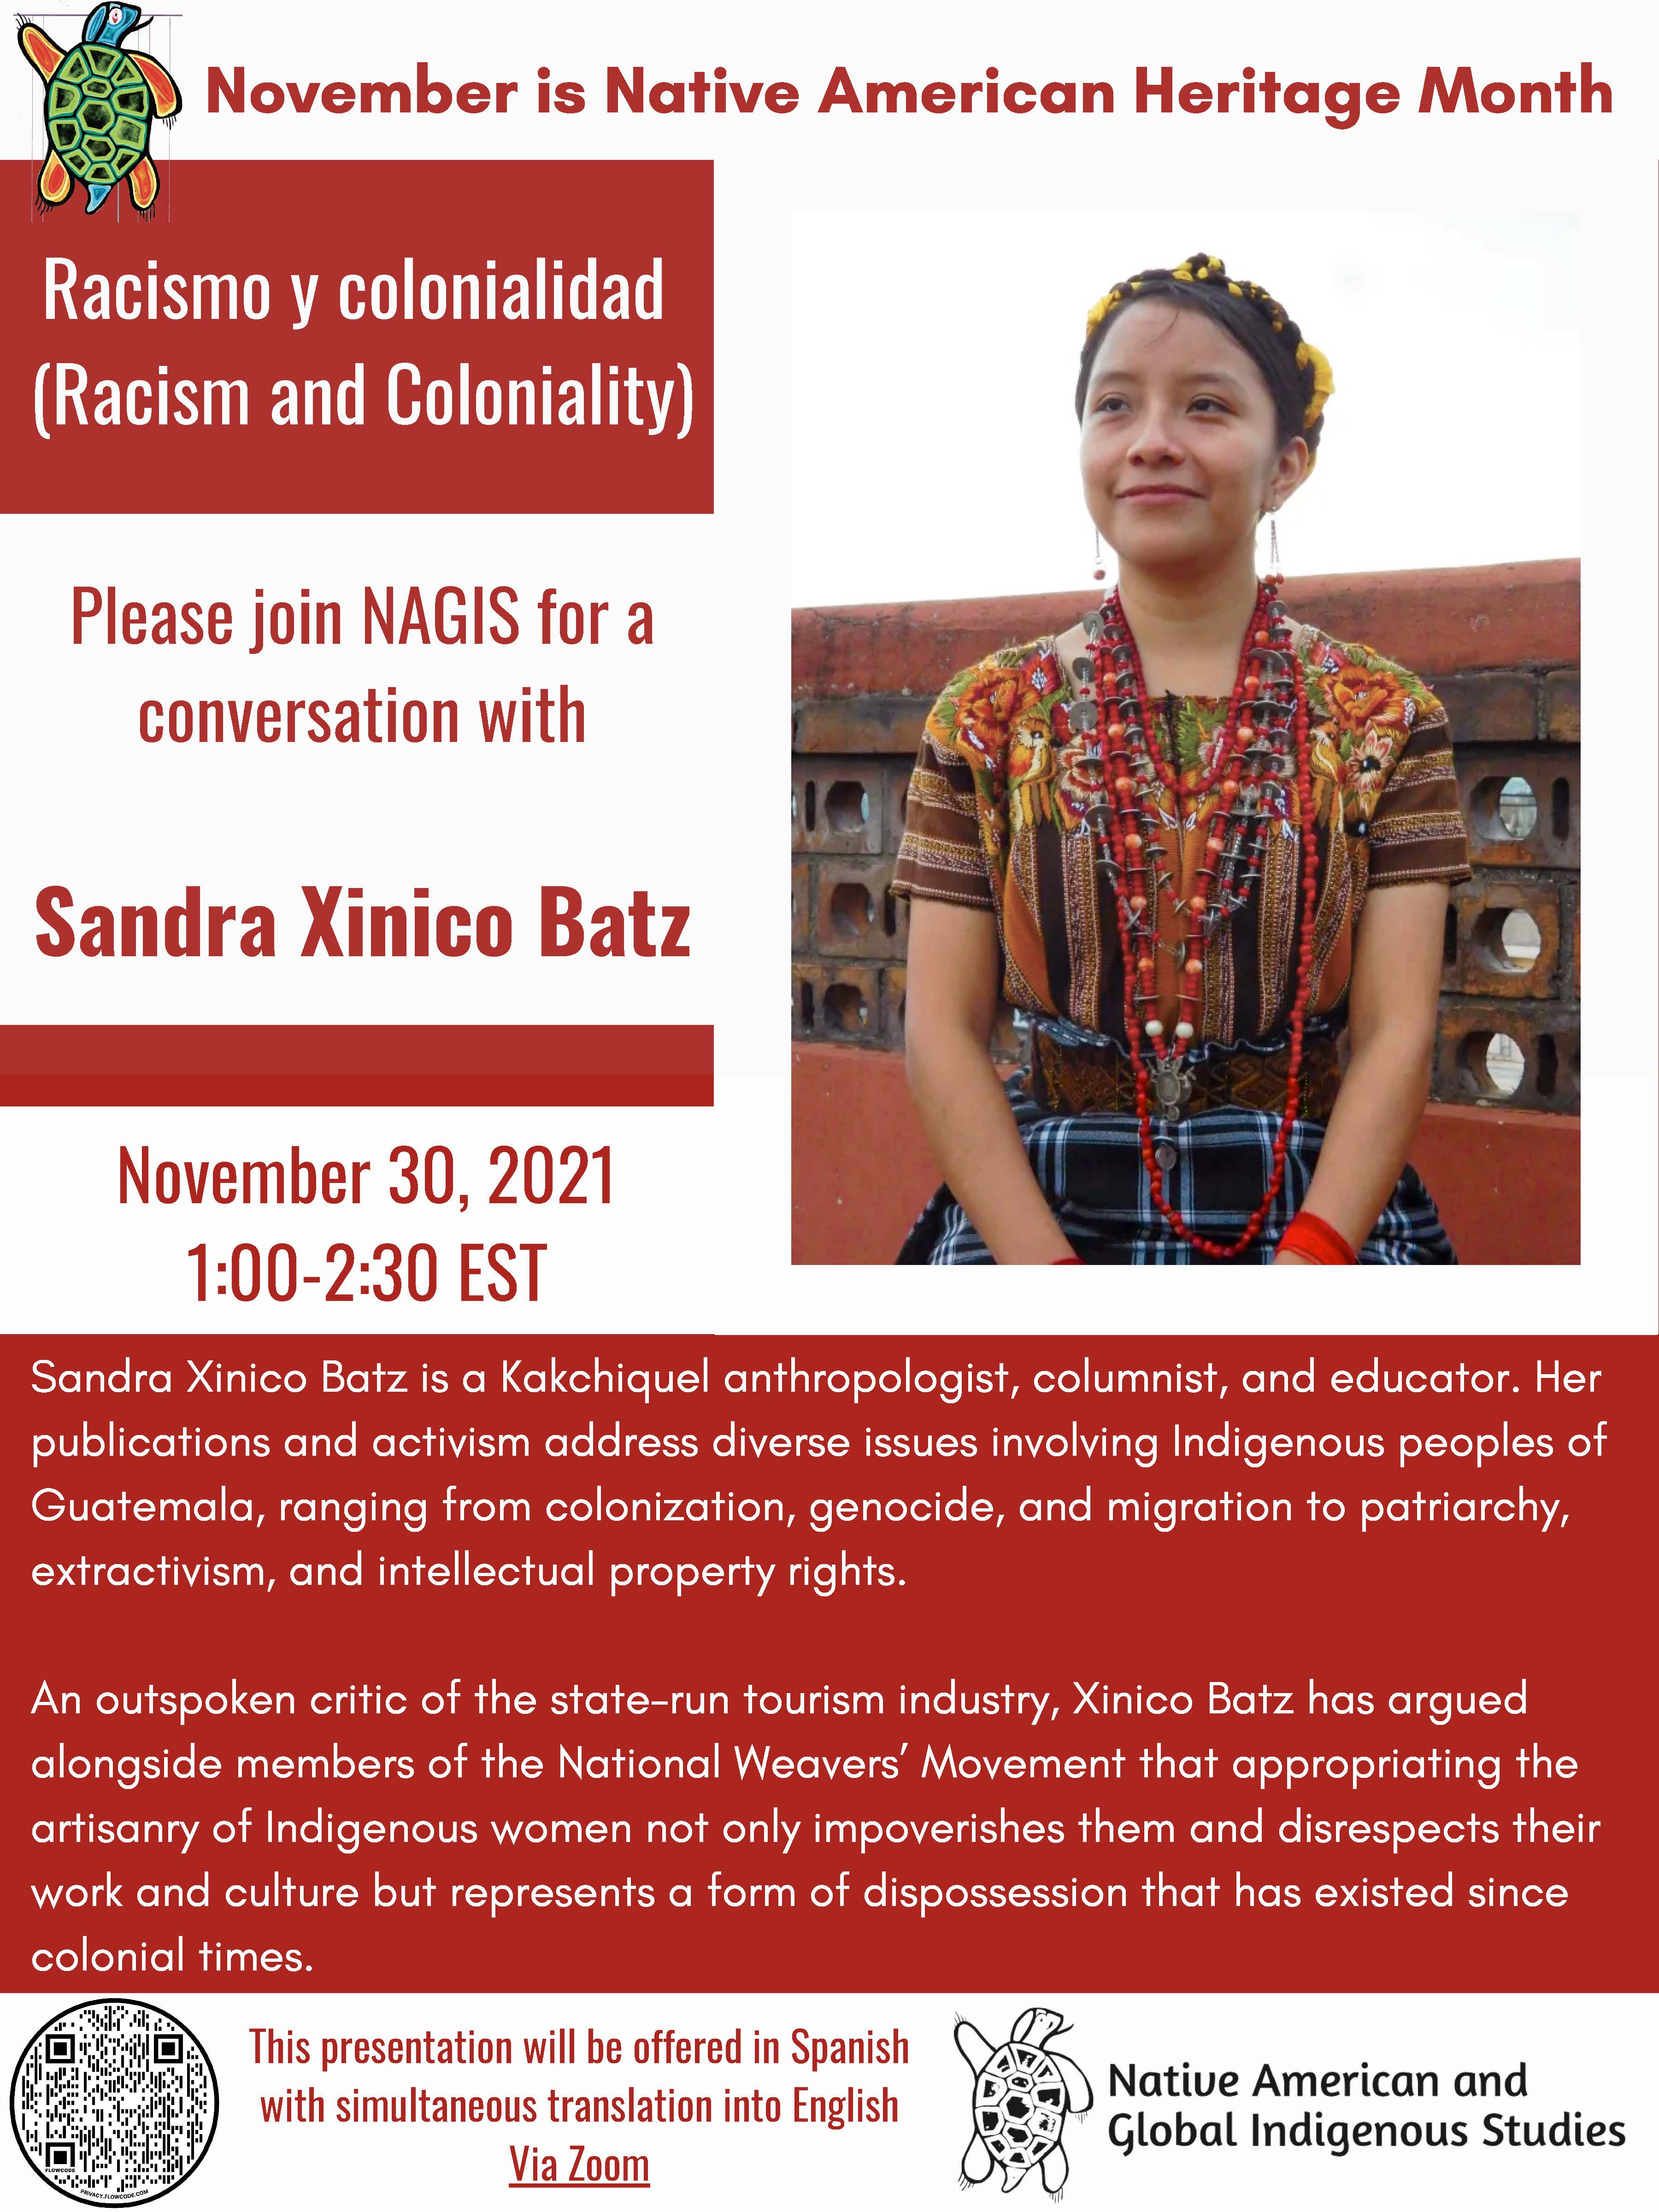 This is an image of an event flyer. The flyer has red and white text. There is a picture of the guest speaker Sandra Xinico Batz. This event will be held on November 30, 2021 at 1:00 p.m. EST via Zoom. There is a QR code on the bottom left-hand corner of the flyer which when scanned will take the user to the Zoom registration web page.